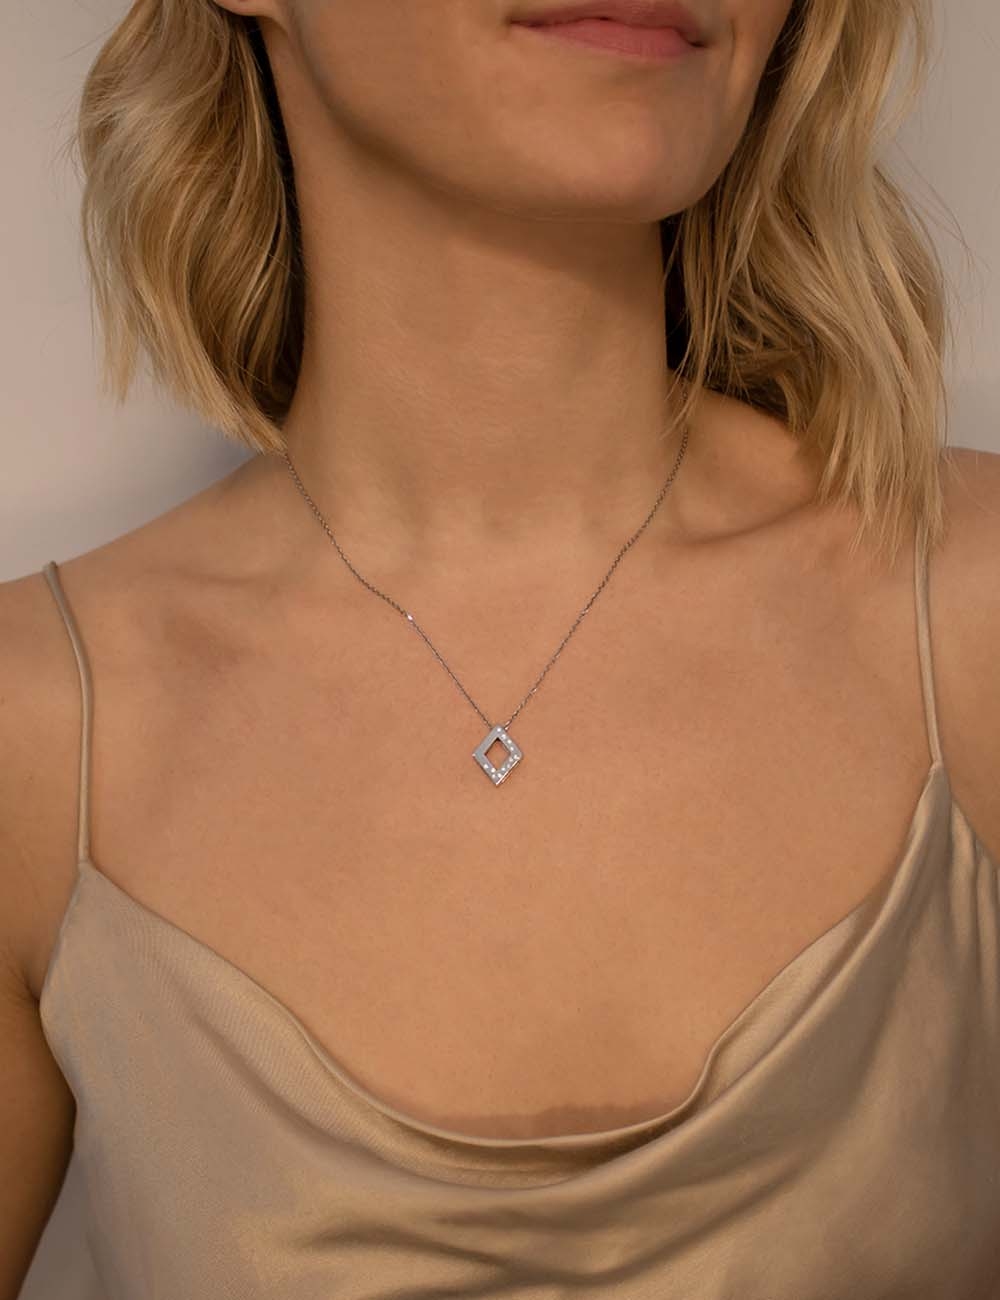 A women's pendant in a diamond shape, made of gold and adorned with white diamonds, suitable for everyday wear.